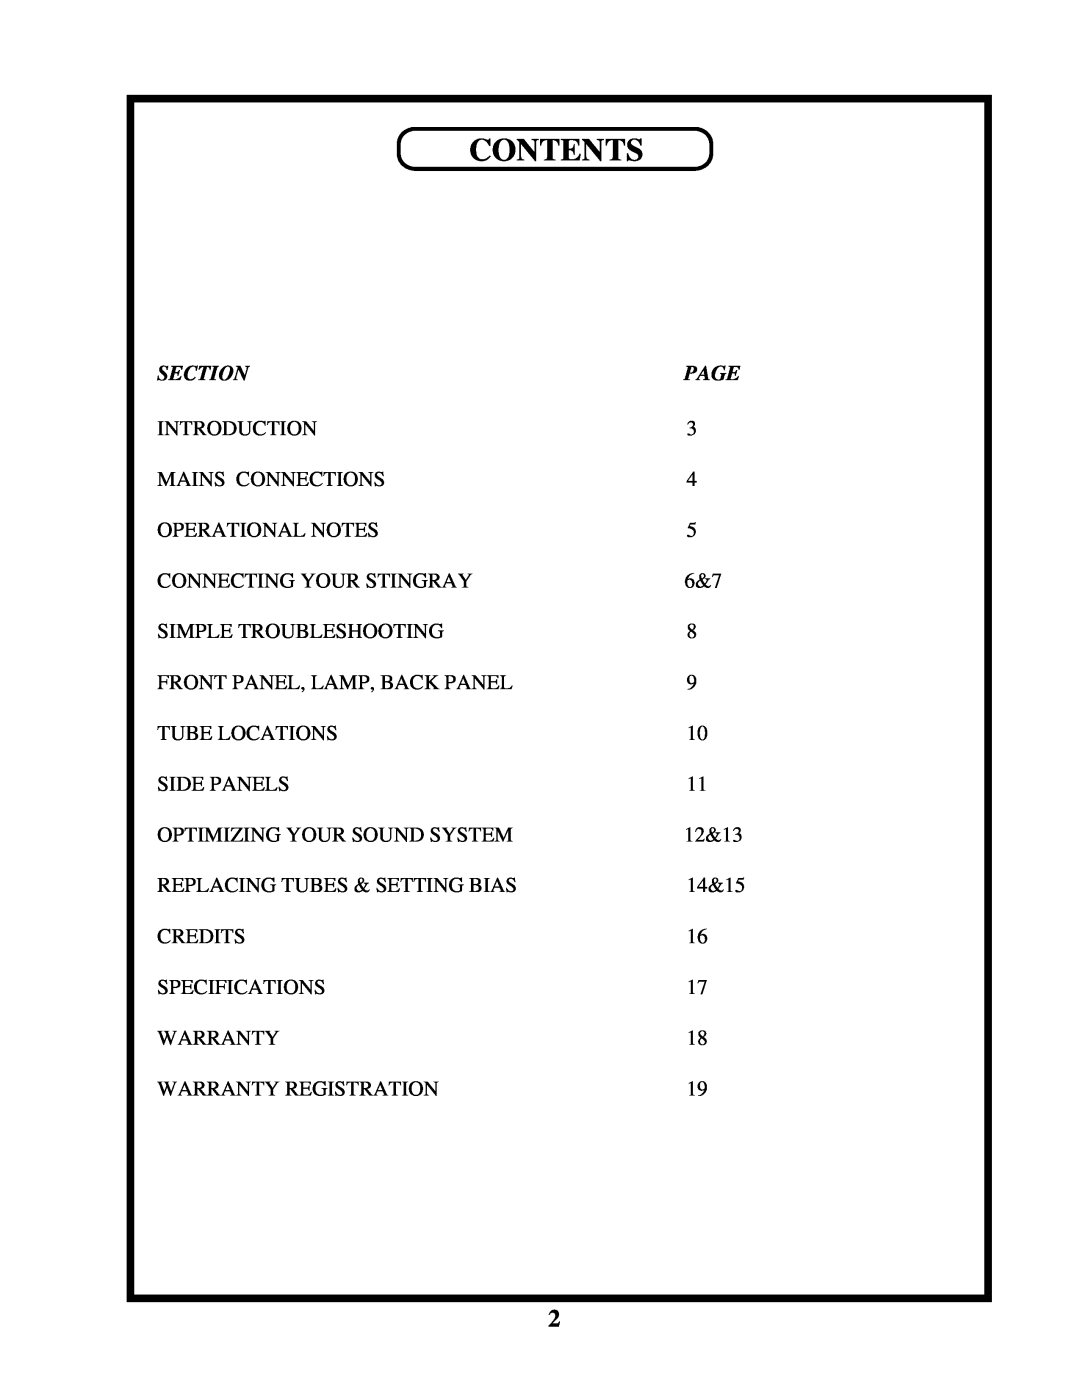 Manley Labs INTEGRATED AMPLIFIER owner manual Contents, Section, Page 